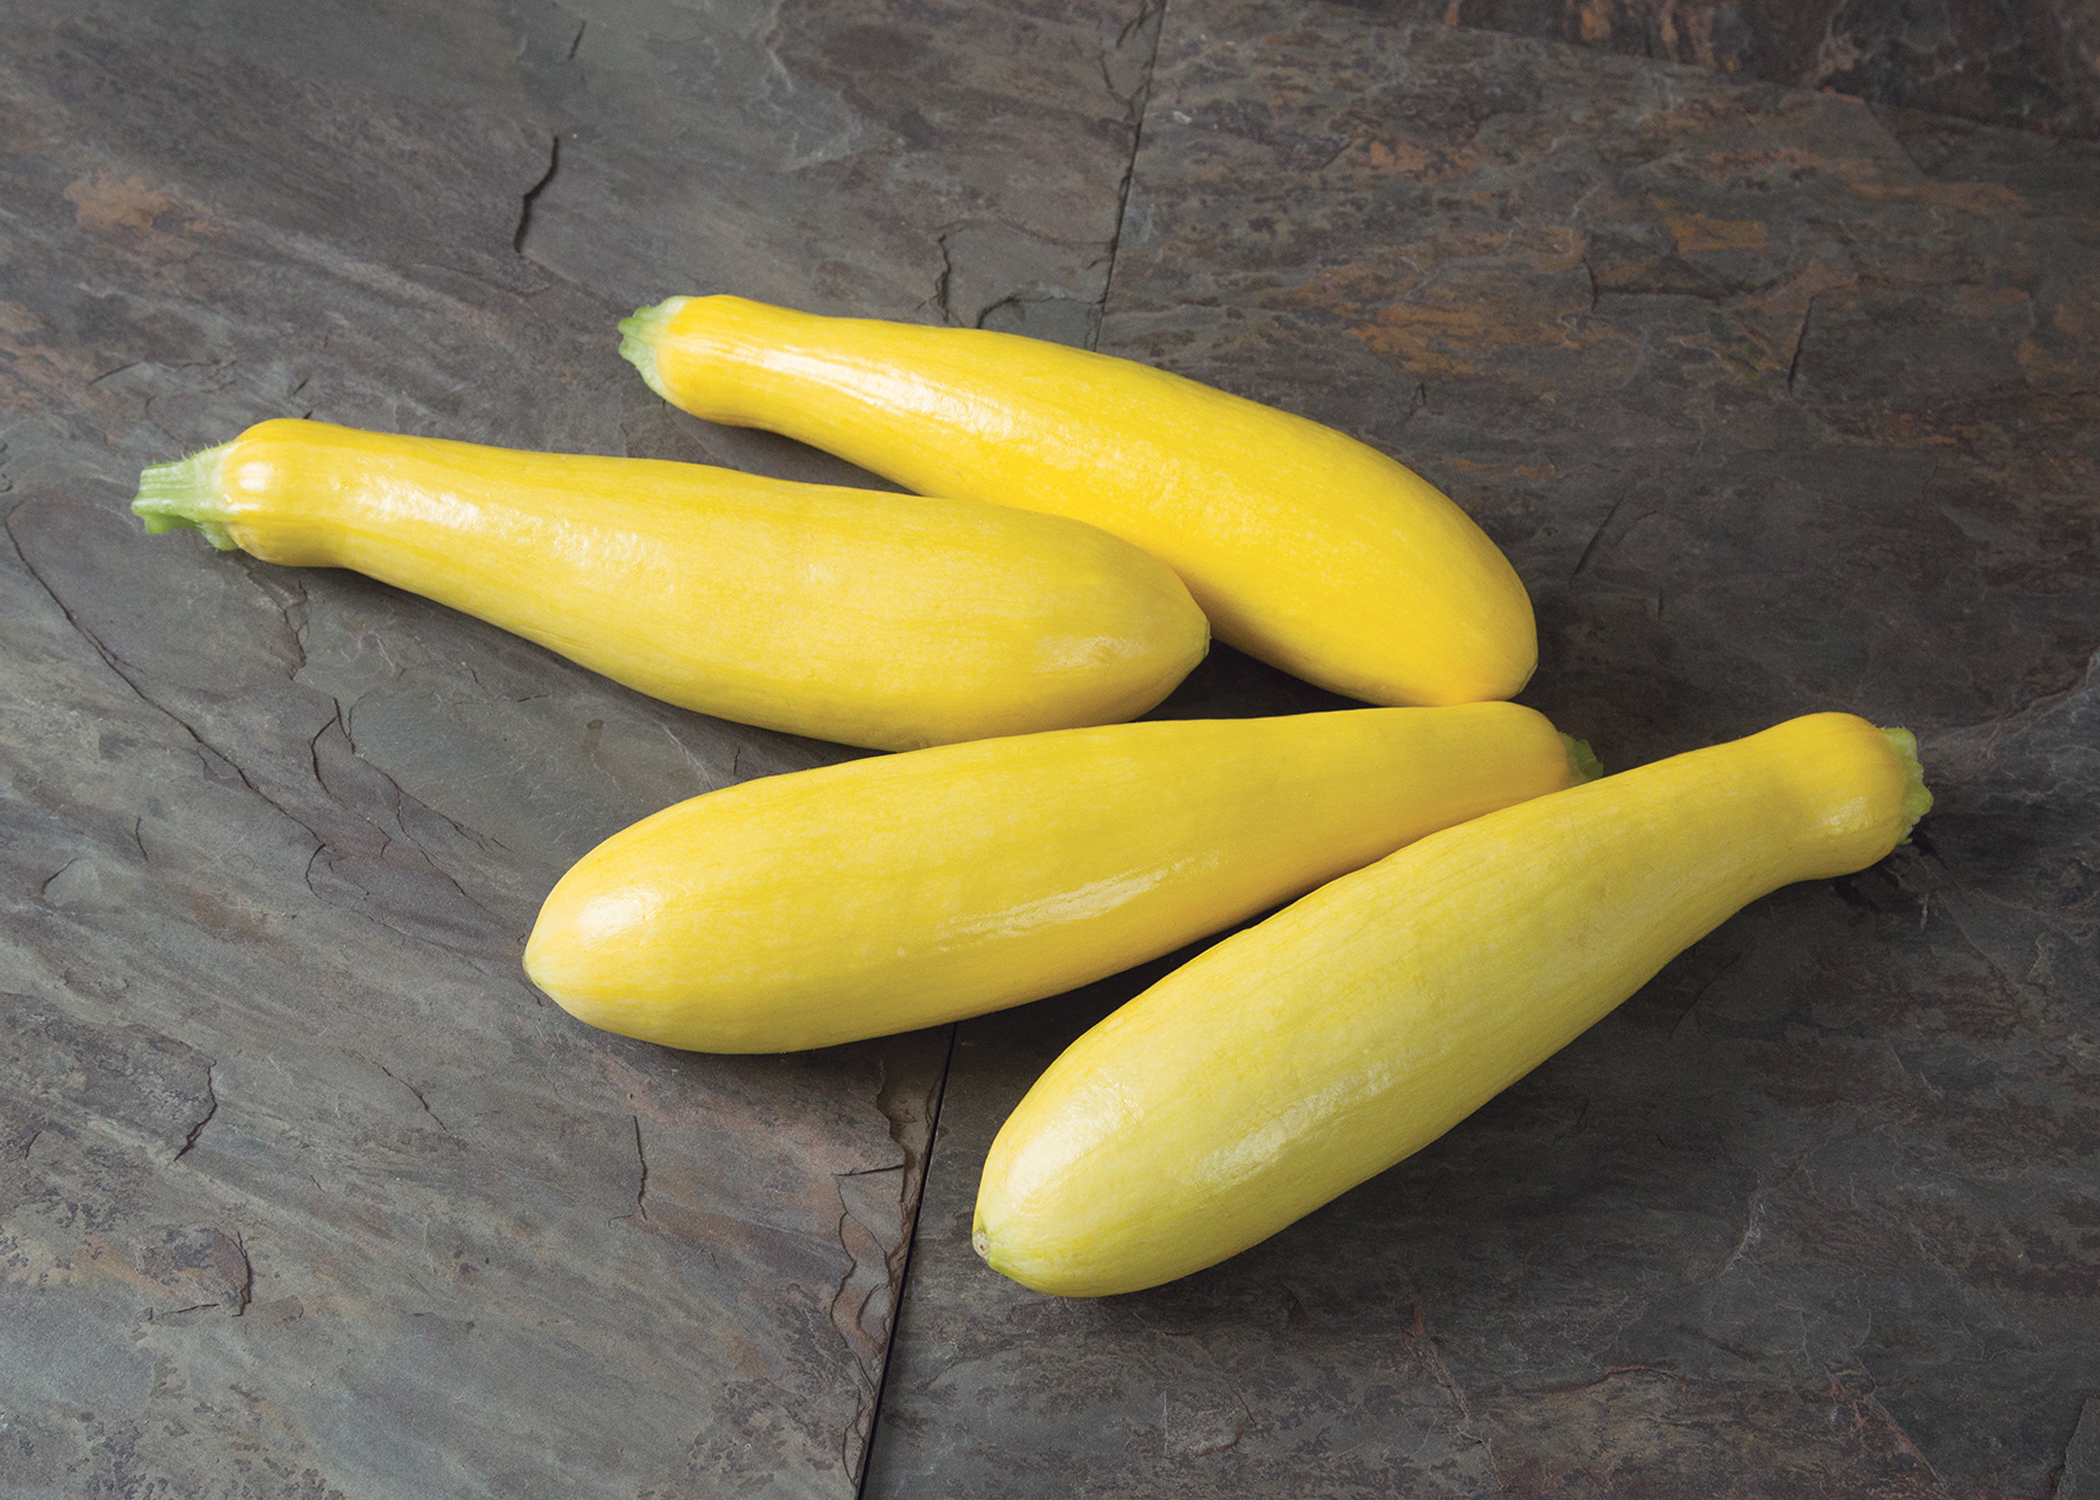 This agronomic image shows the squash variety called Grandprize.